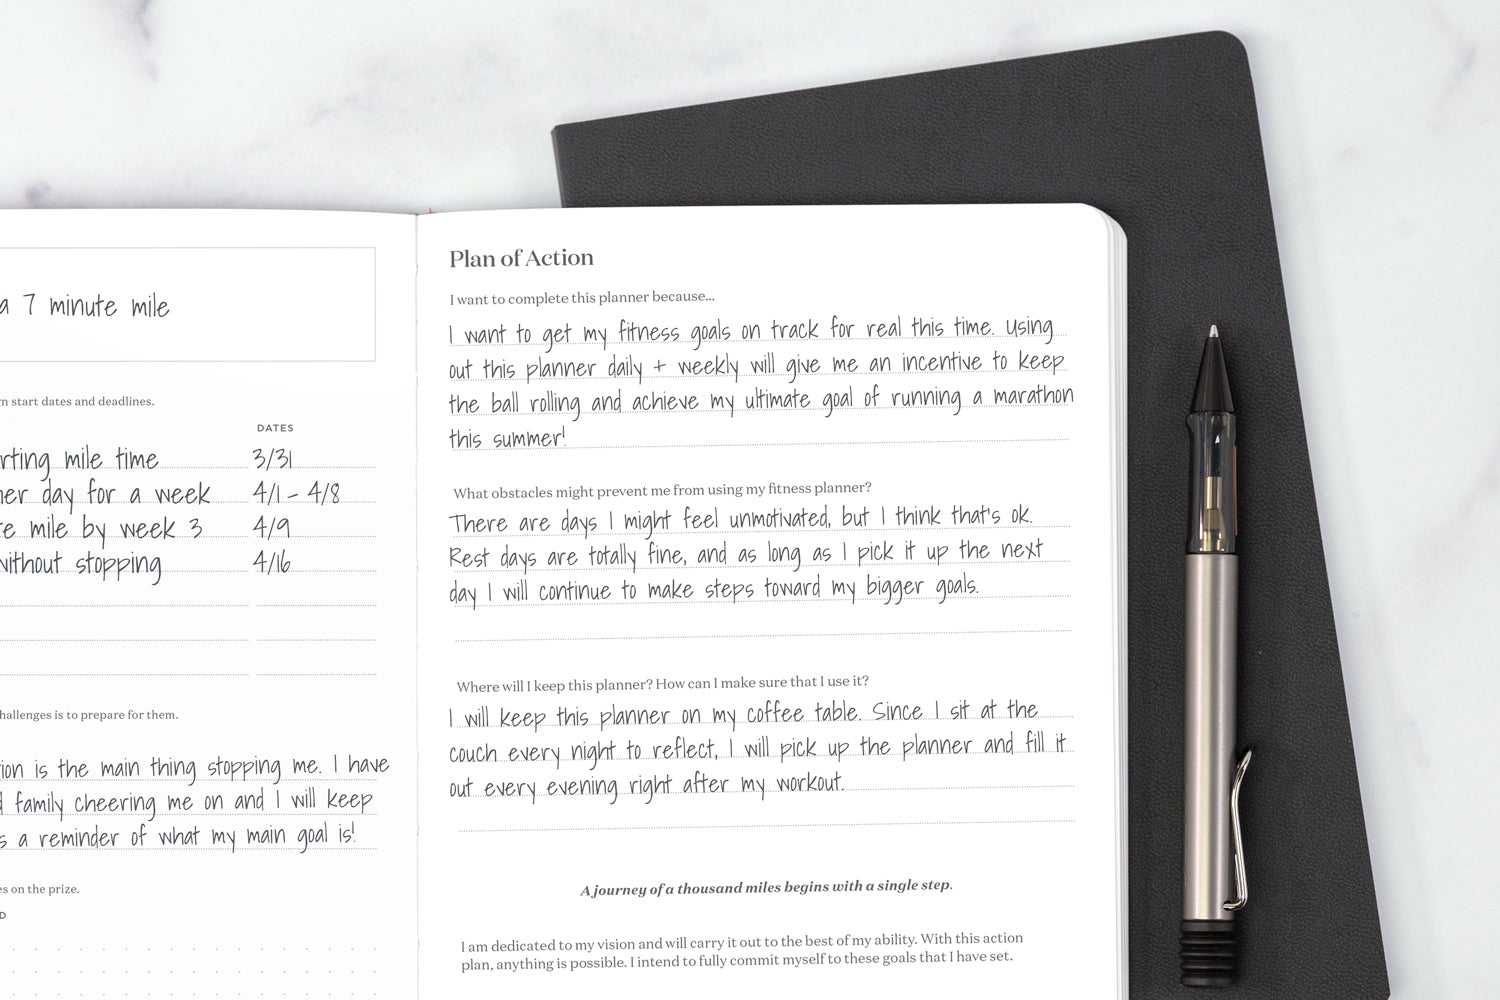 a fitness journal with smart fitness goals written in it, lying on top of another journal on a white table